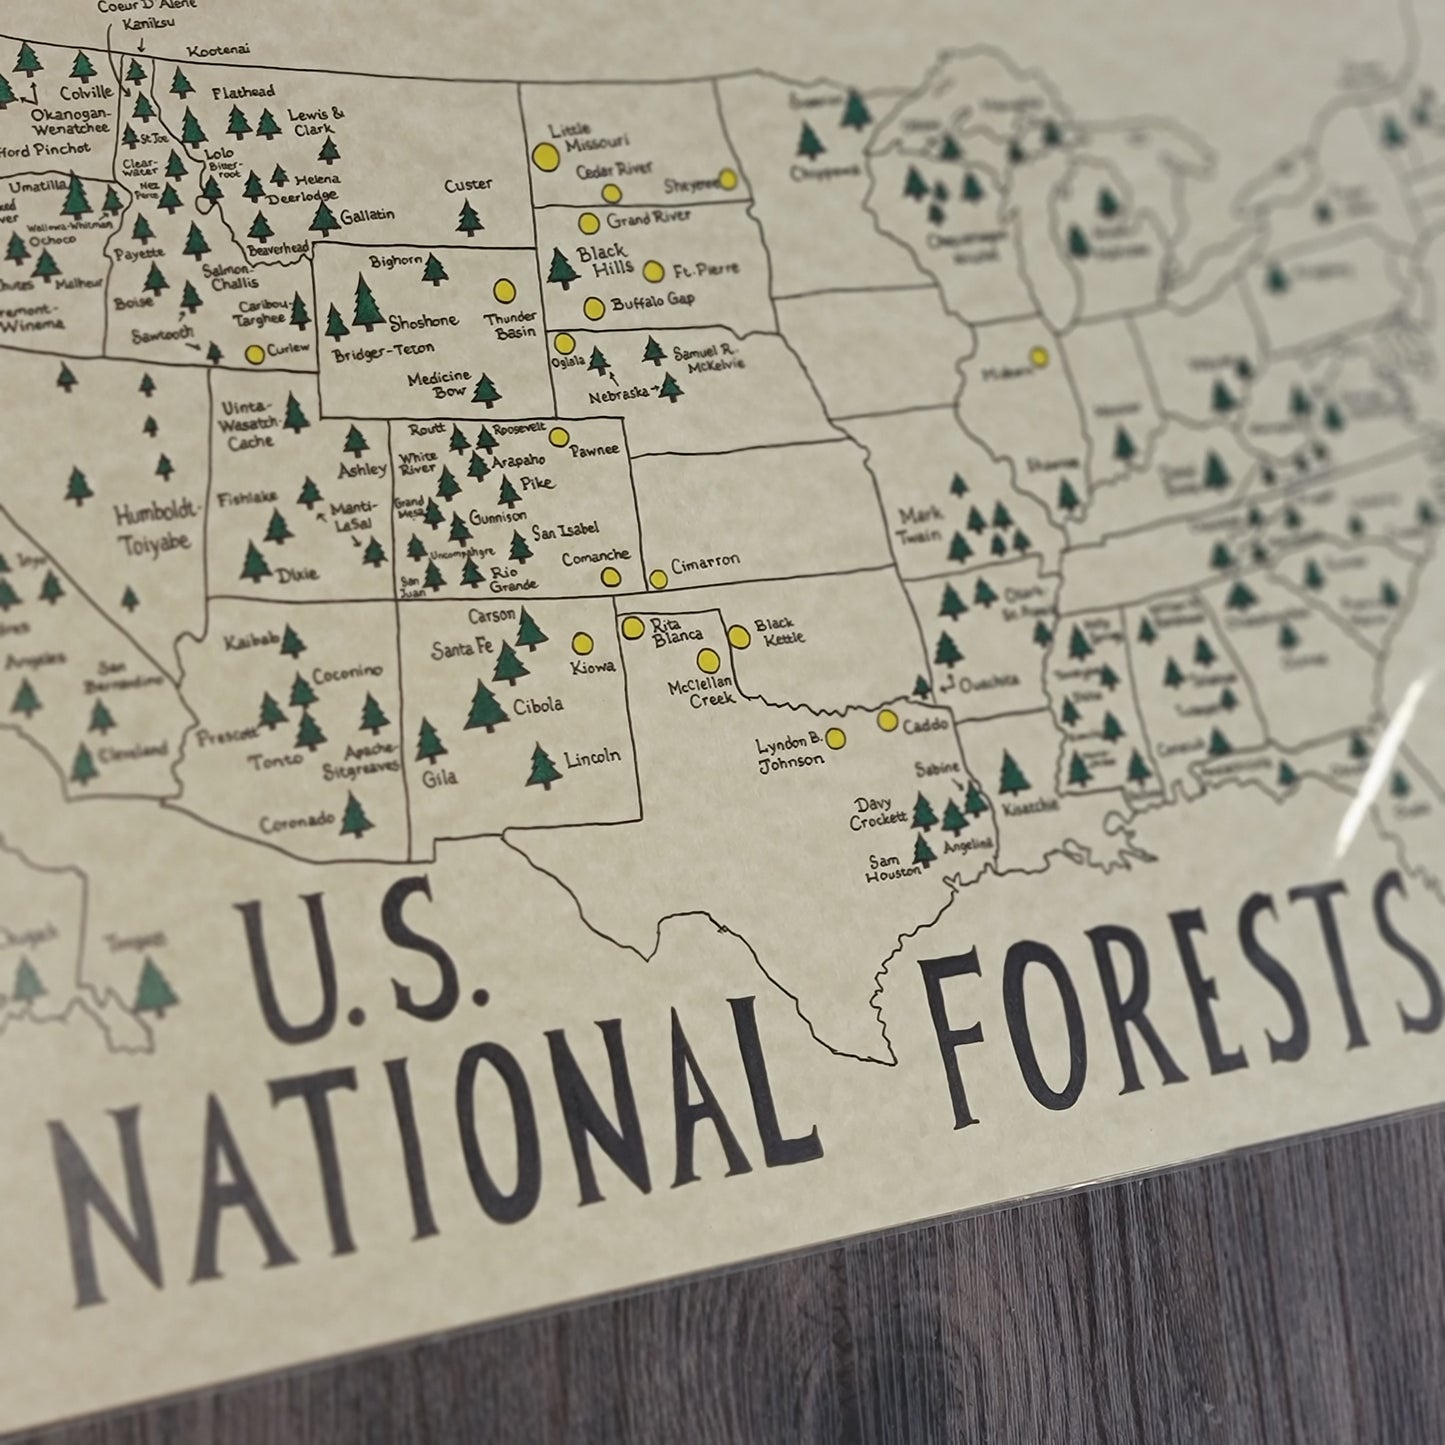 US National forests map